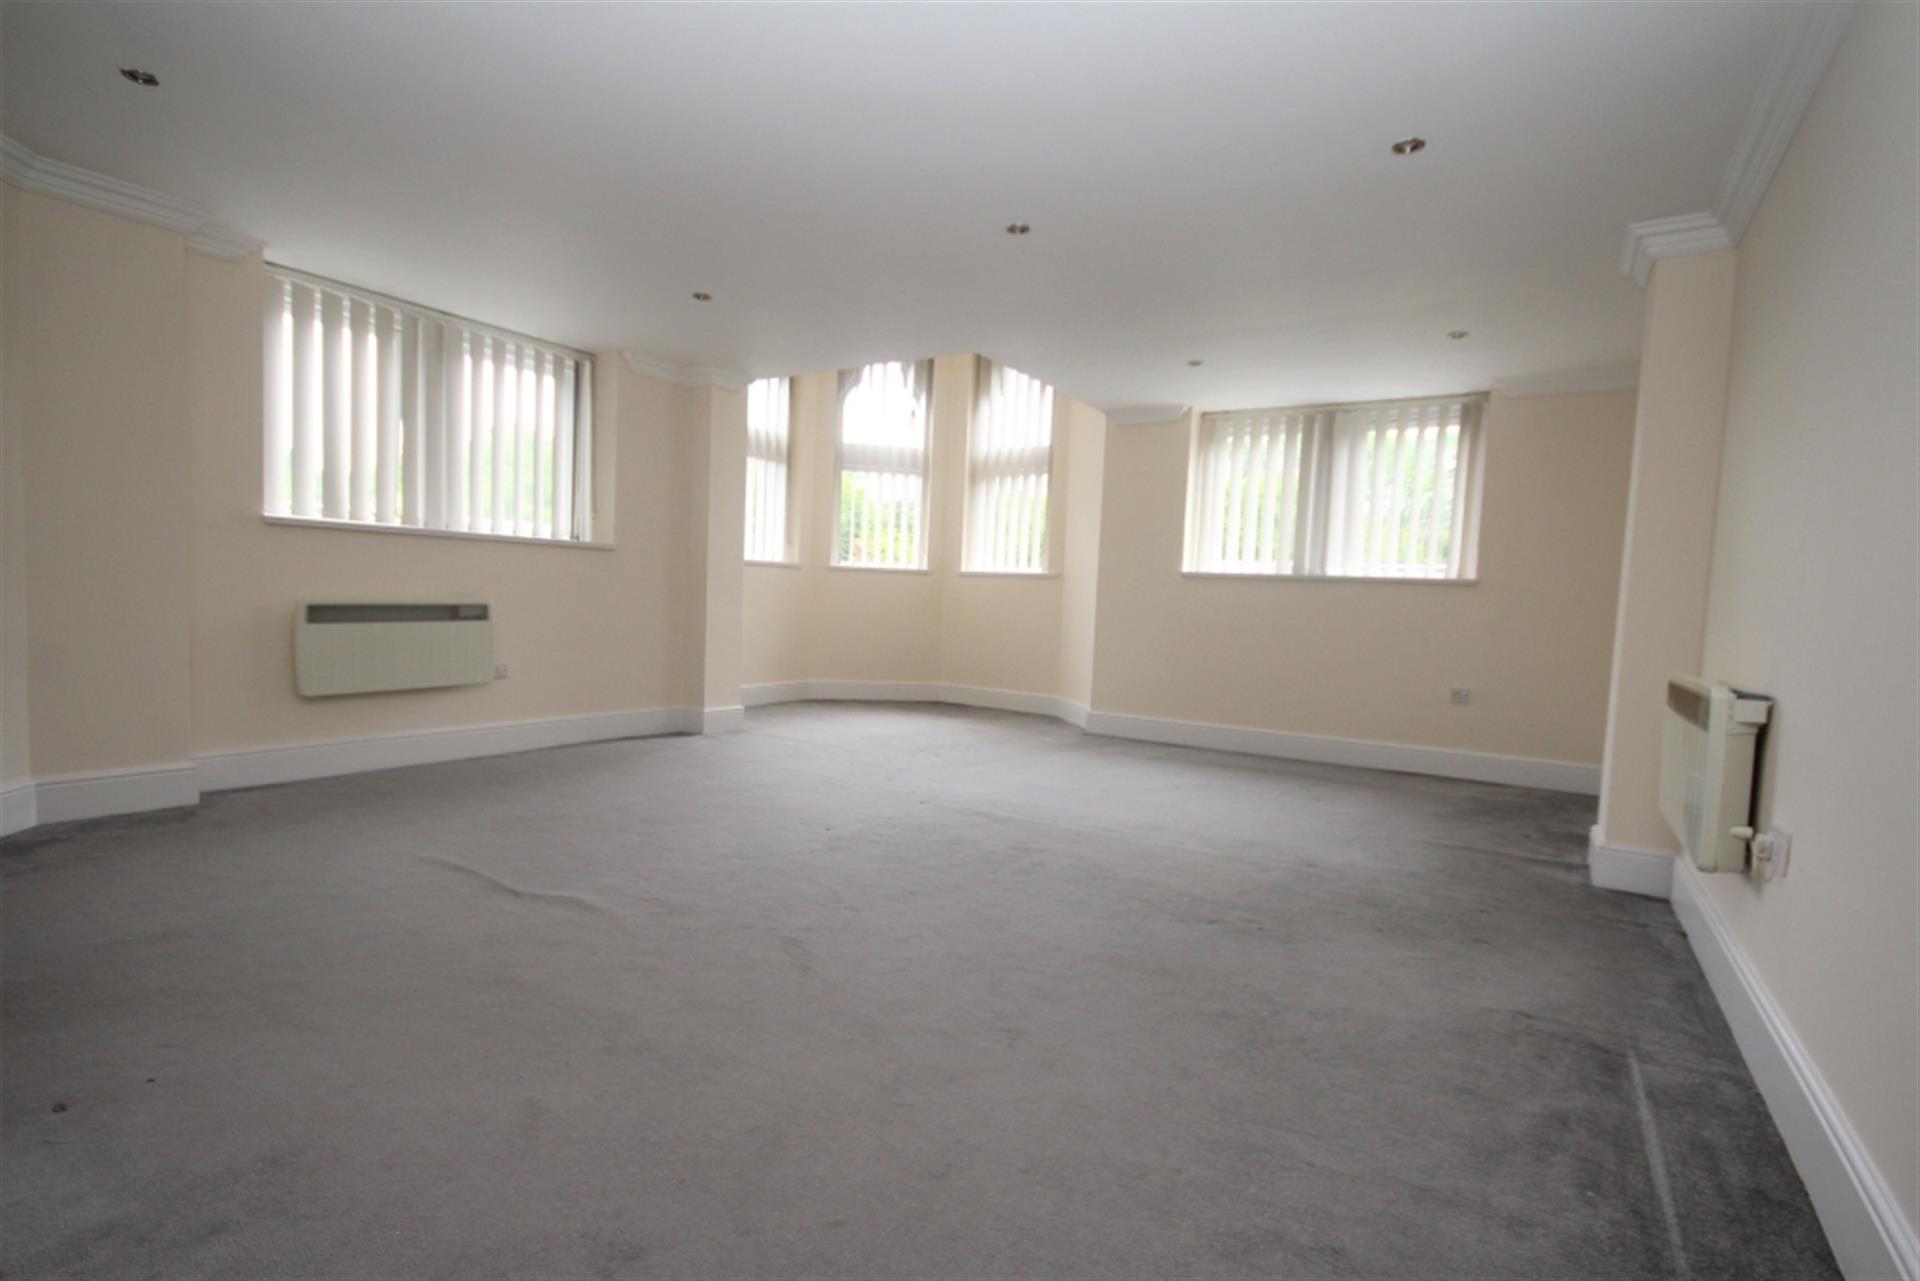 2 bedroom apartment flat / apartment To Let in Knott St, Darwen, Lancs - Property photograph